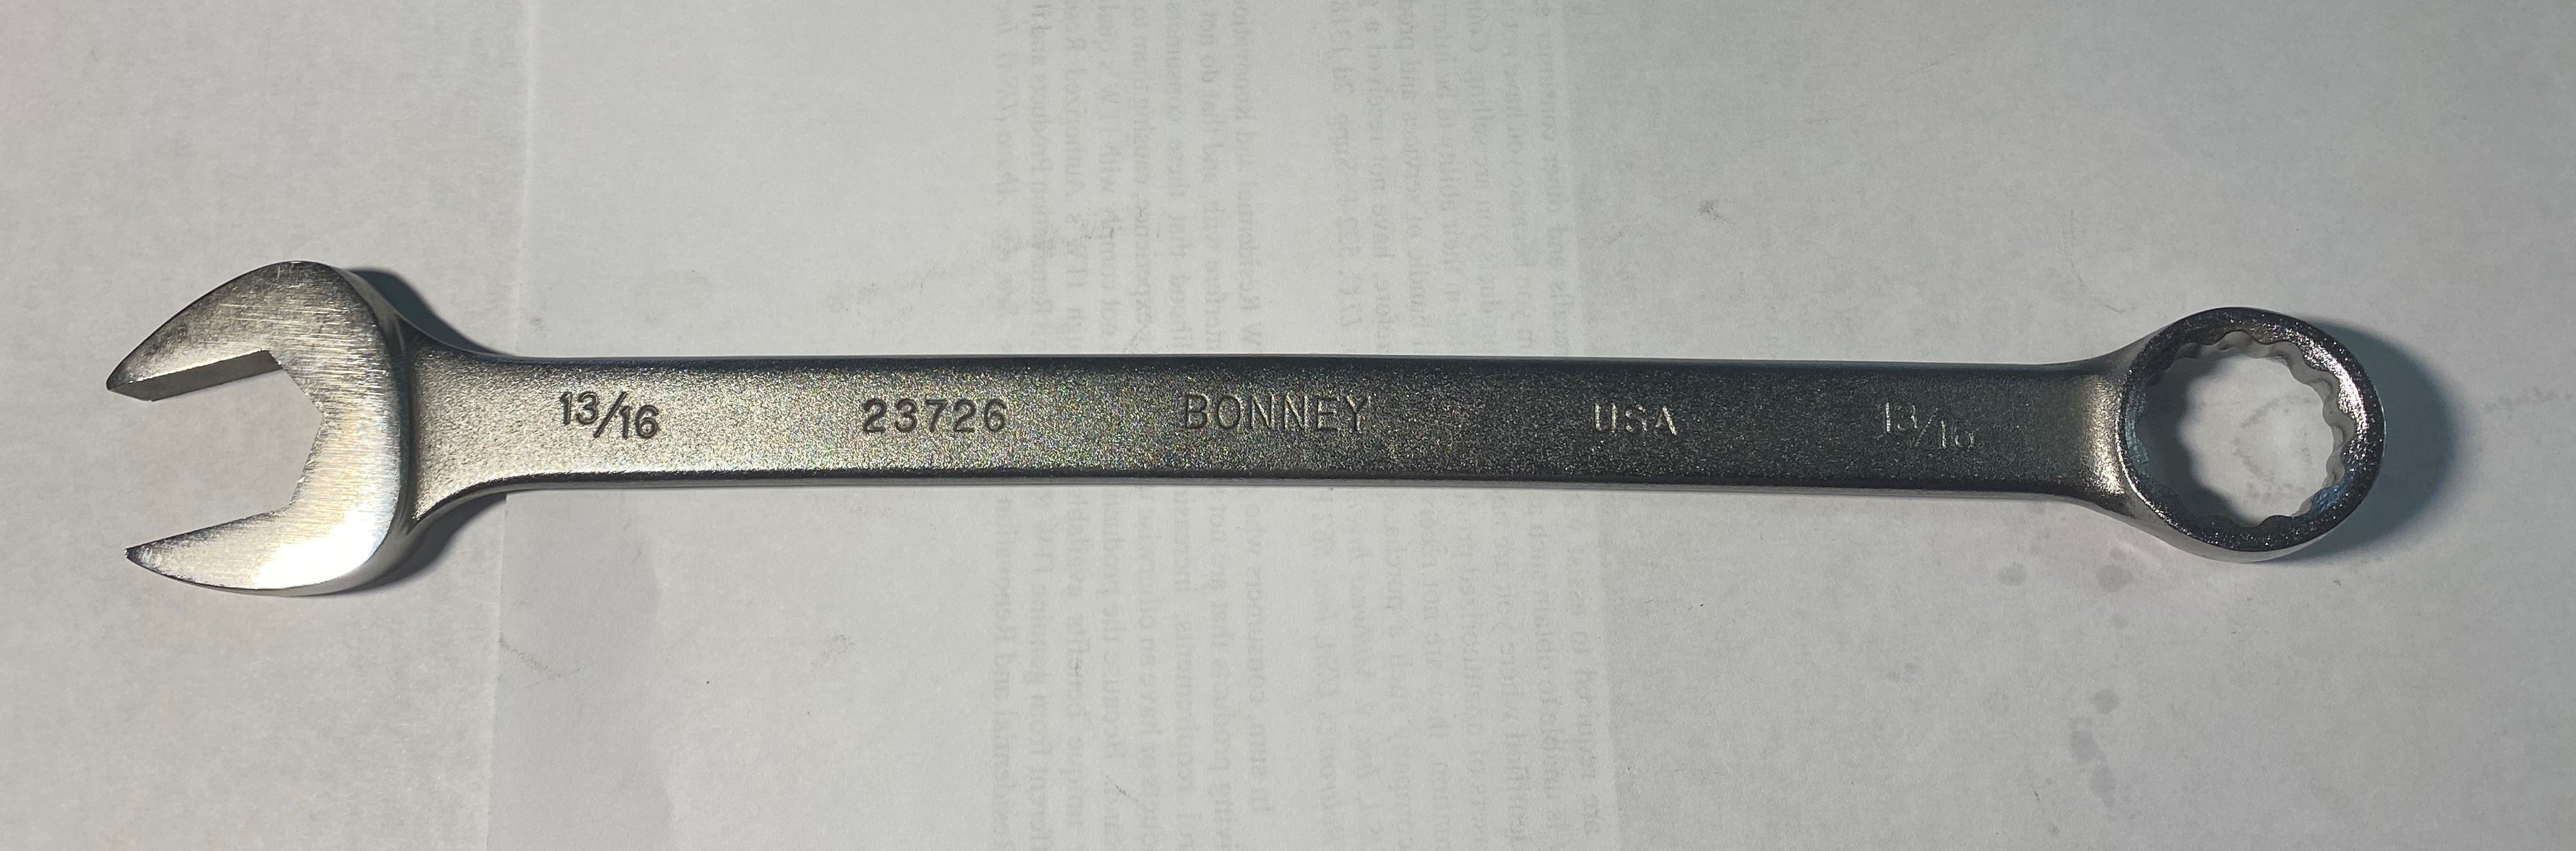 BONNEY 23726 13/16 Combination Wrench 12pt. USA